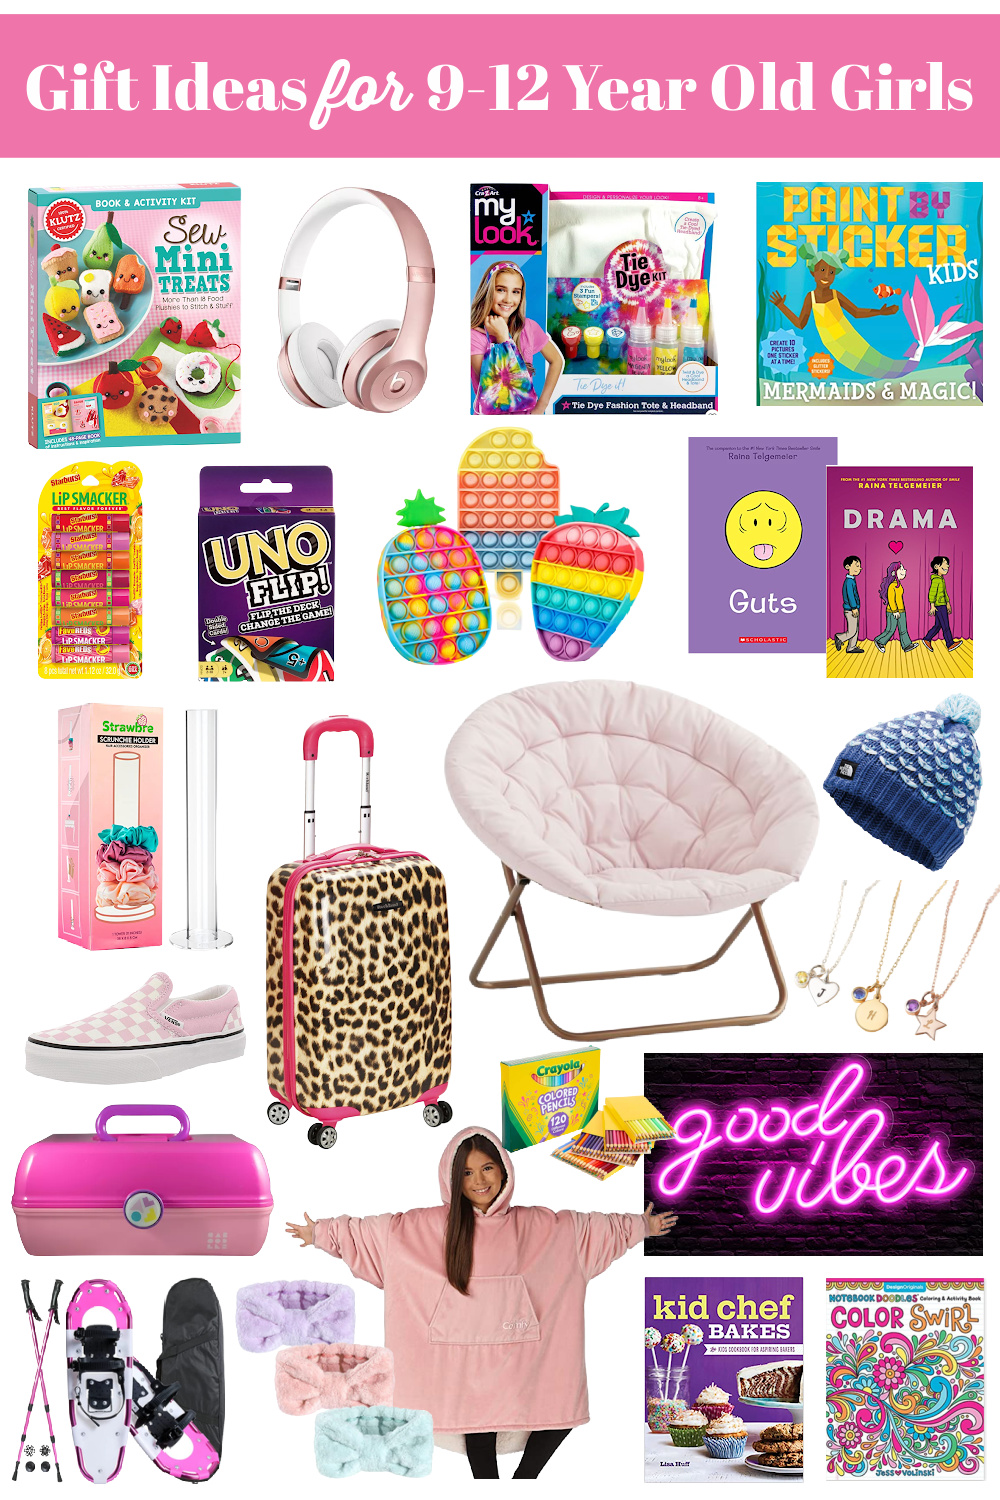 Gift Ideas for 9-12 Year Old Girls